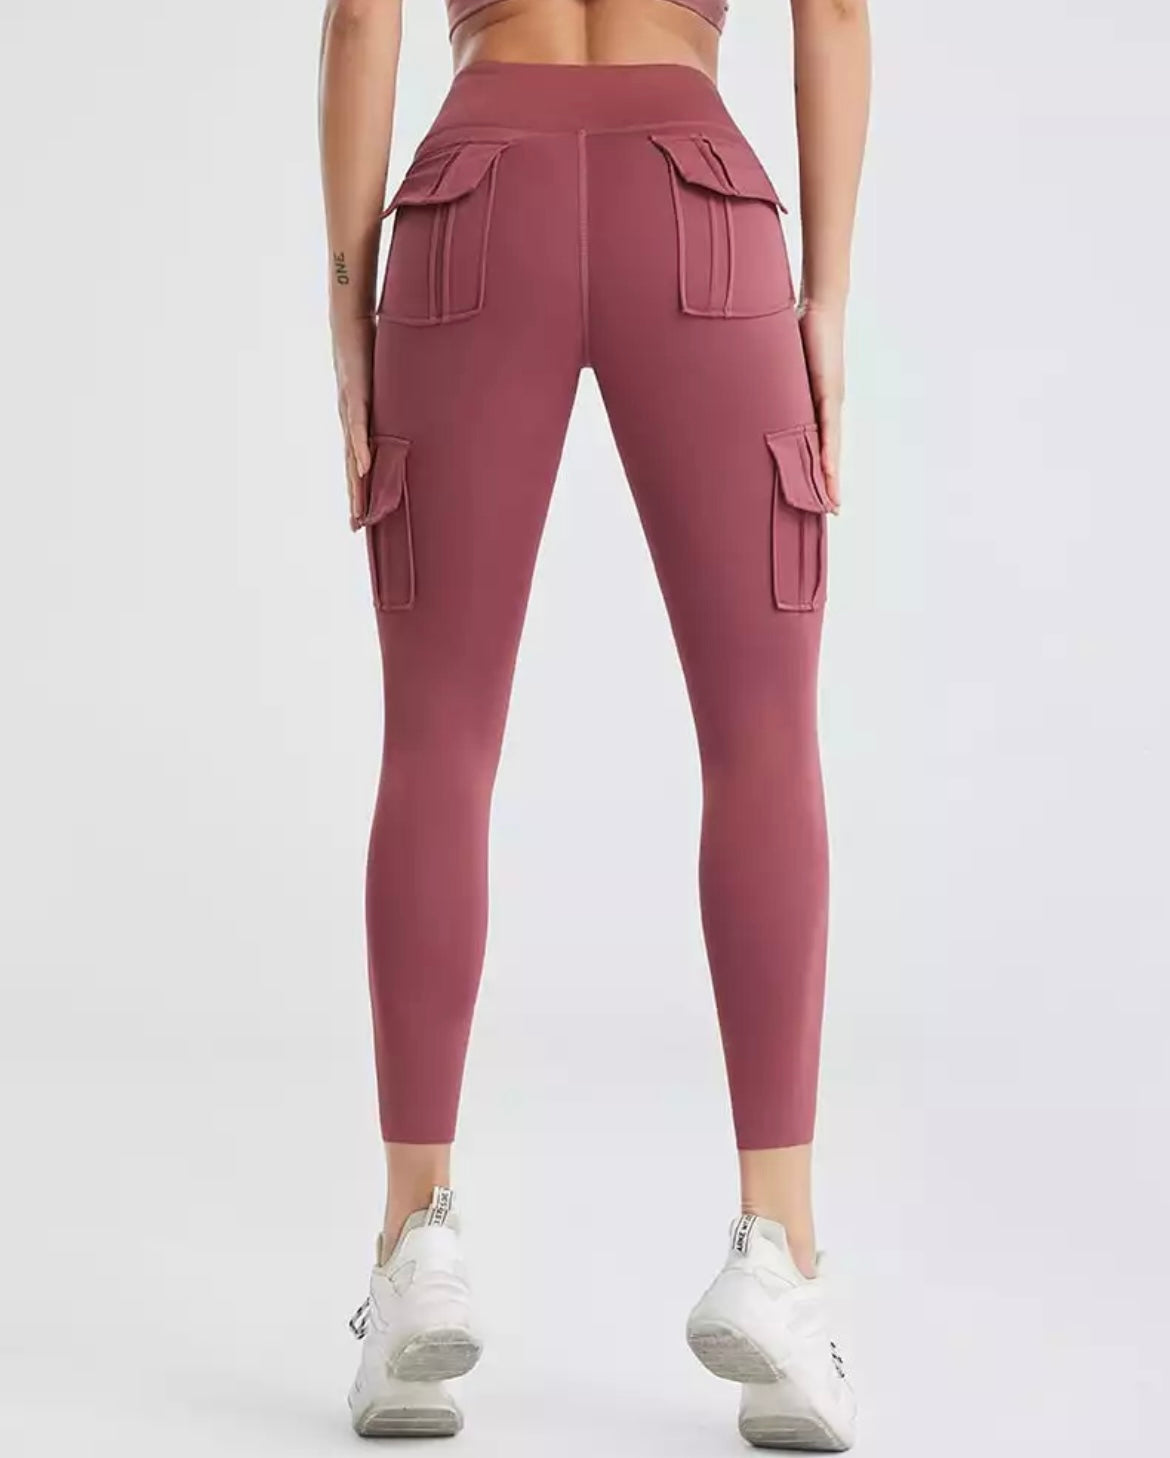 Spandex High-Waisted Leggings with Pockets